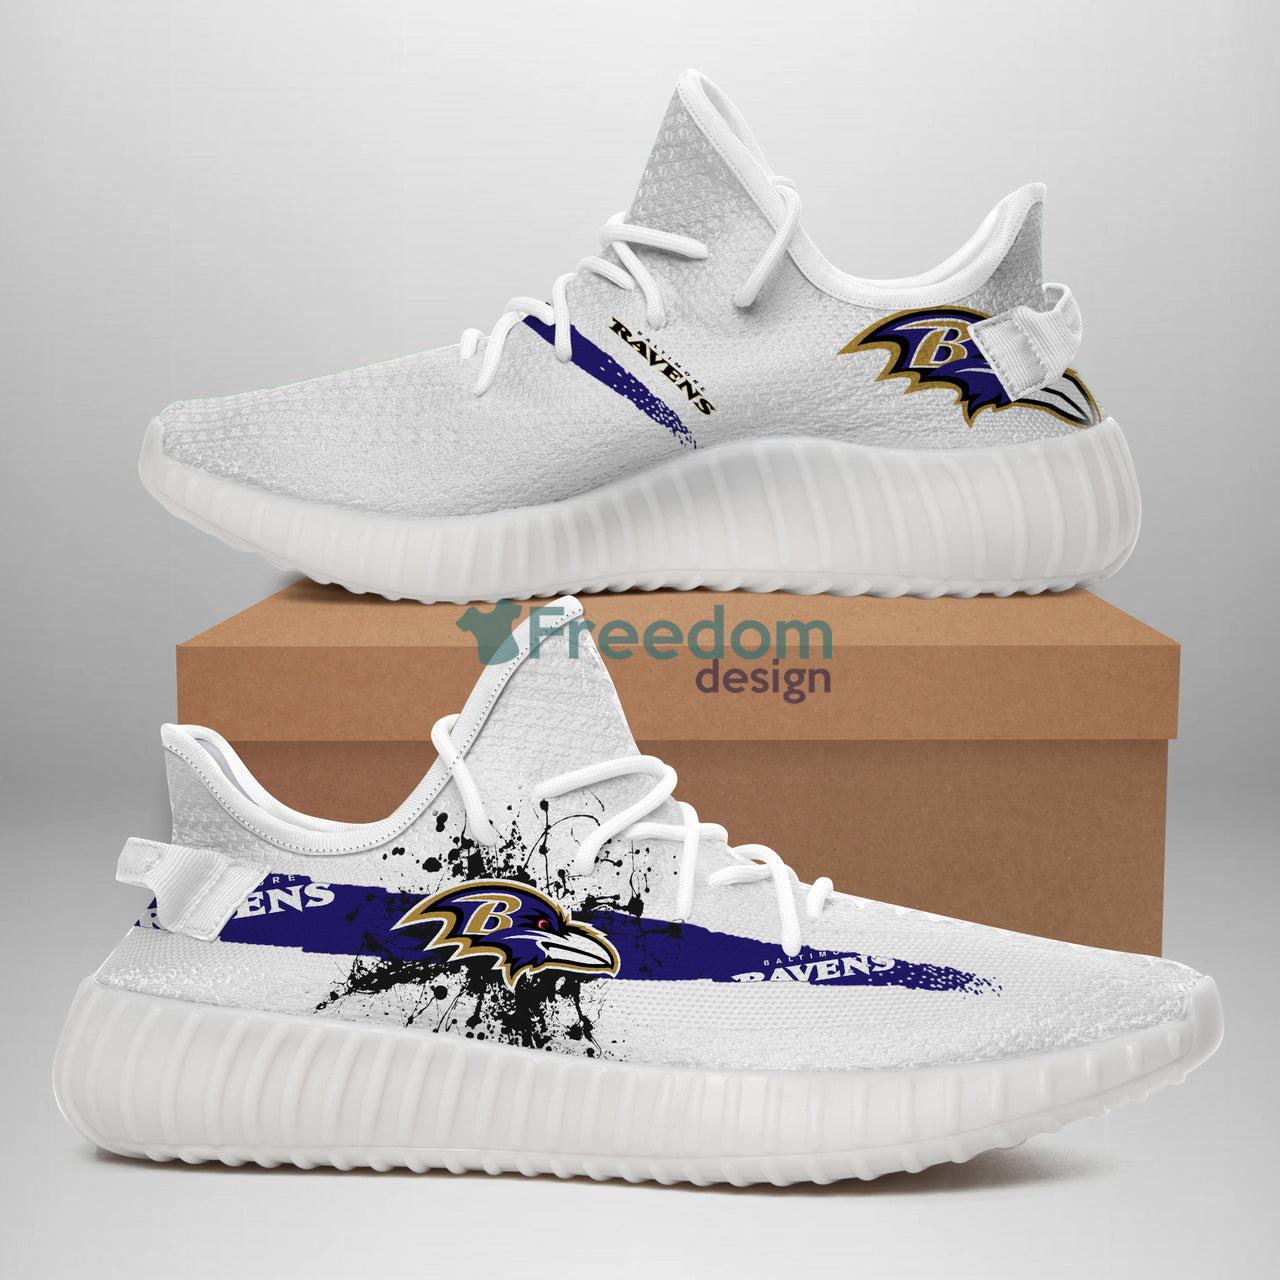 Baltimore Ravens Team Sport Lover Yeezy Shoes